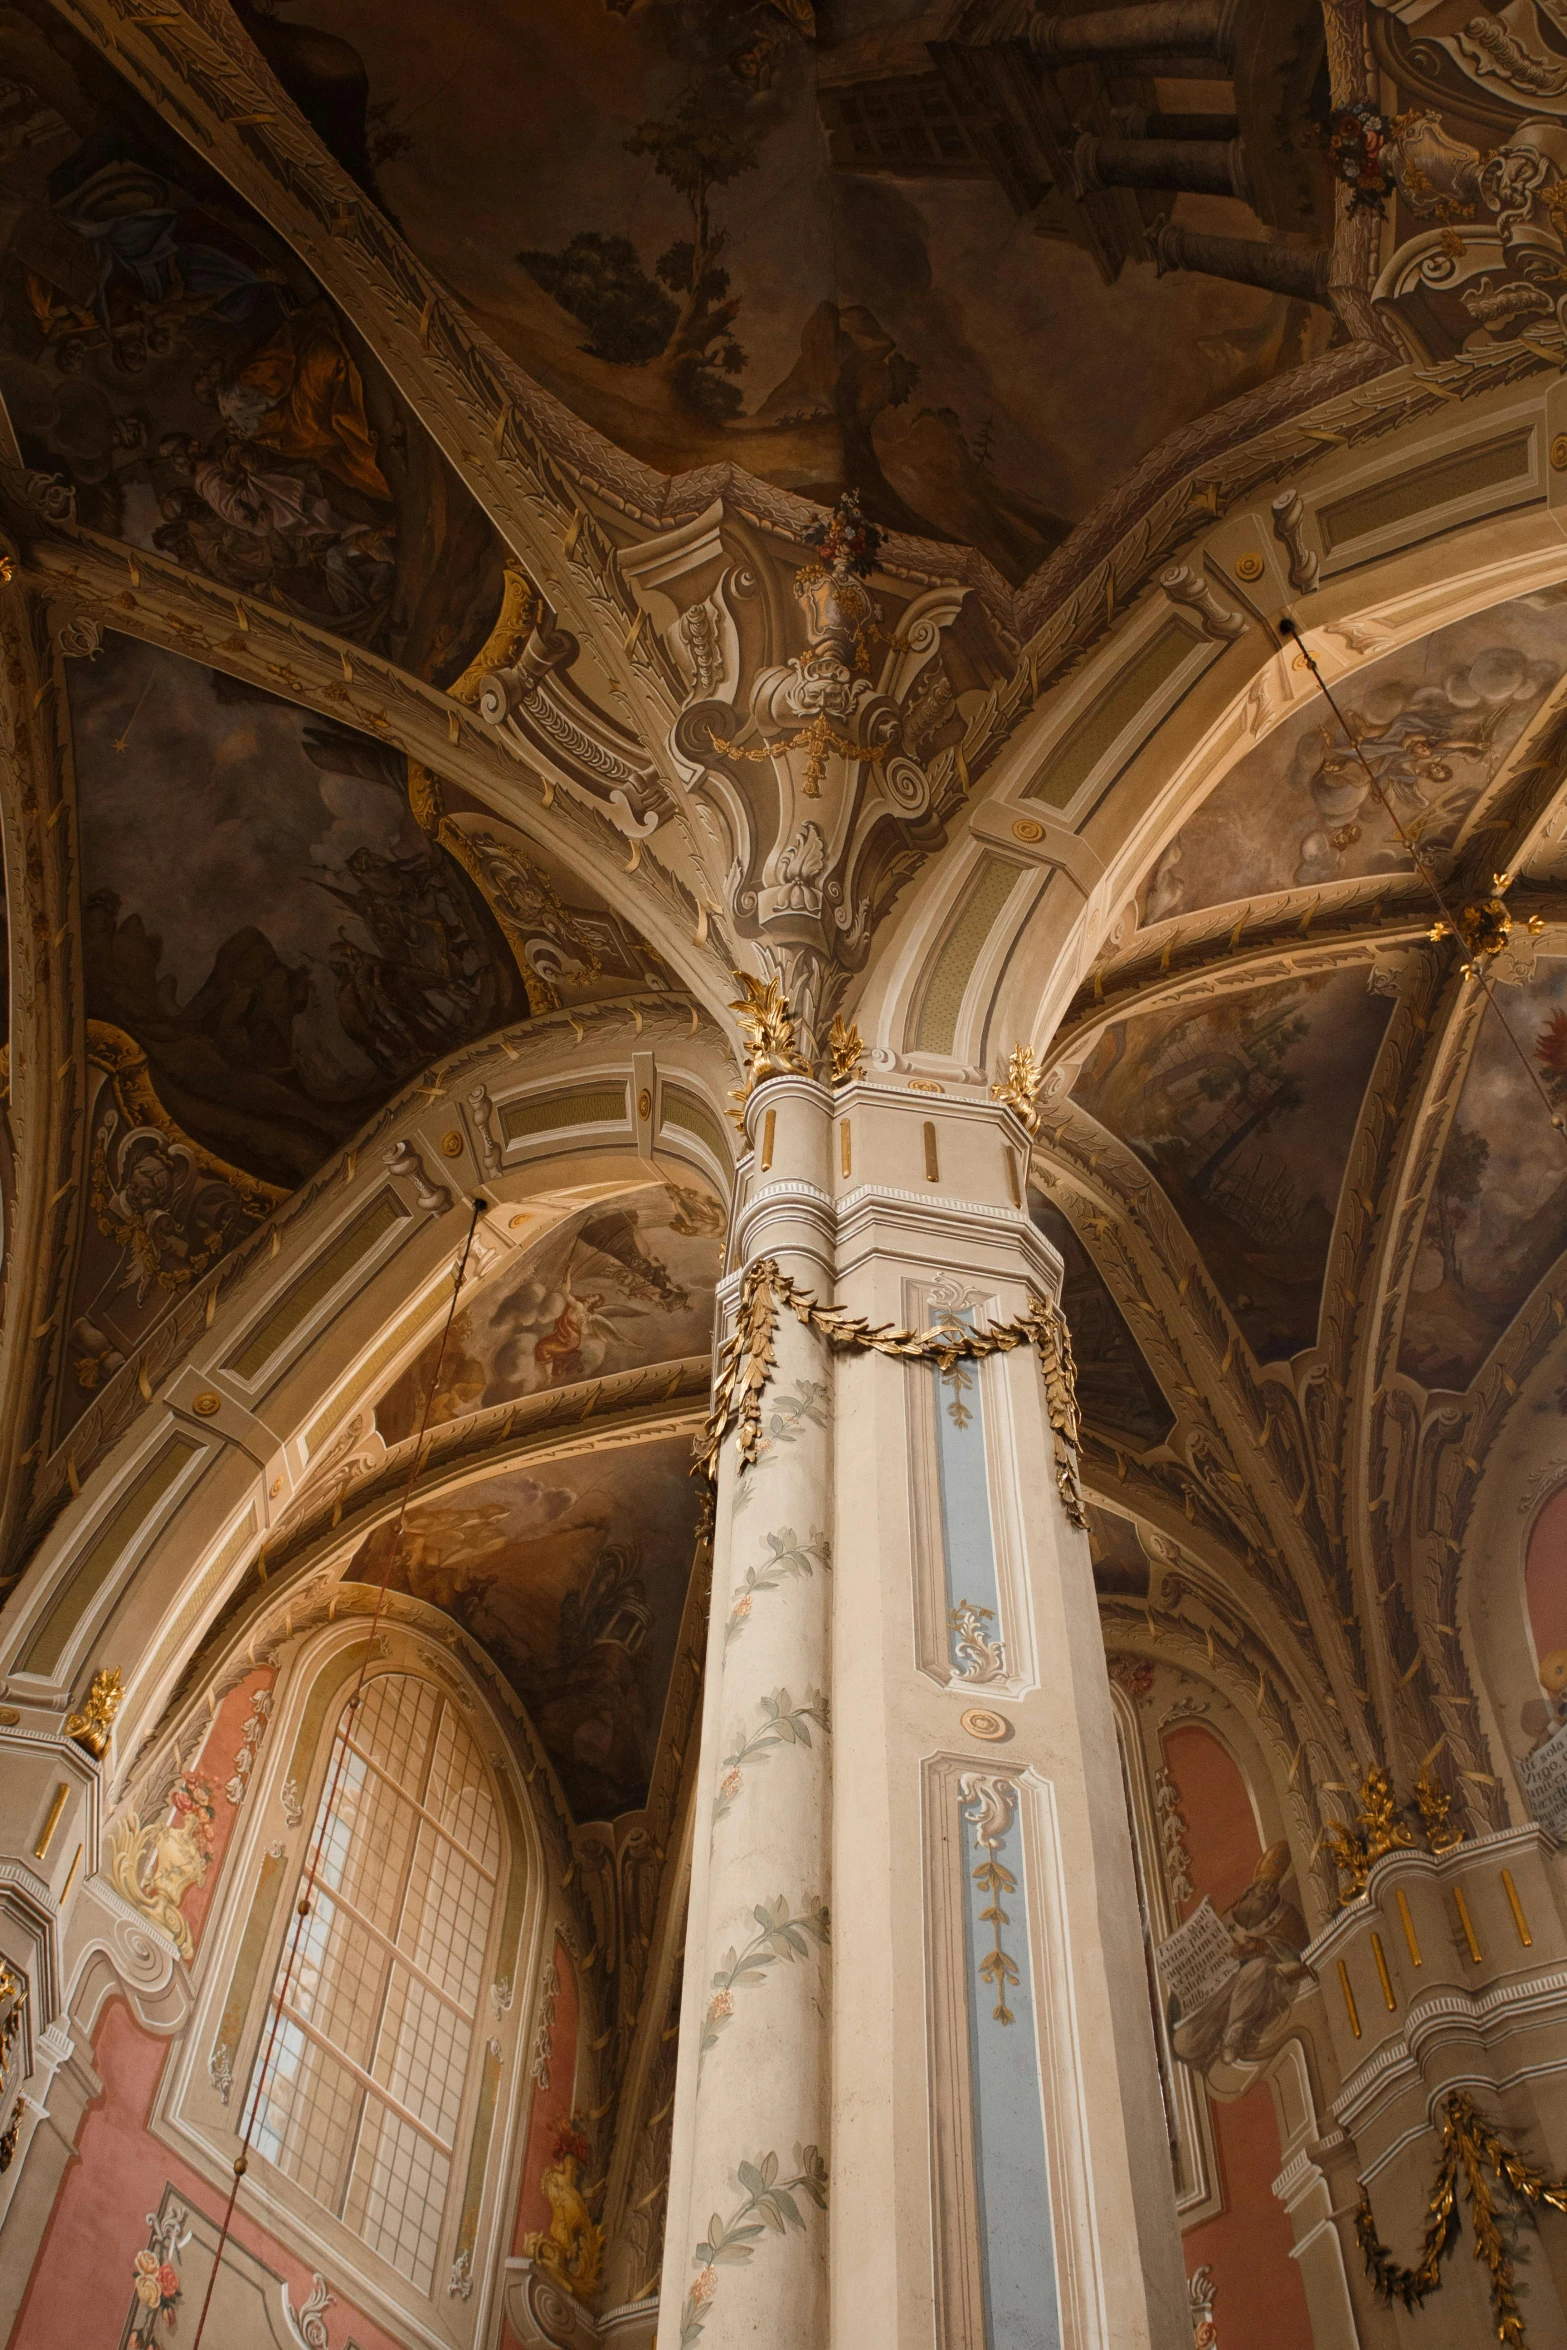 large ornate decorated columns with paintings and chandeliers